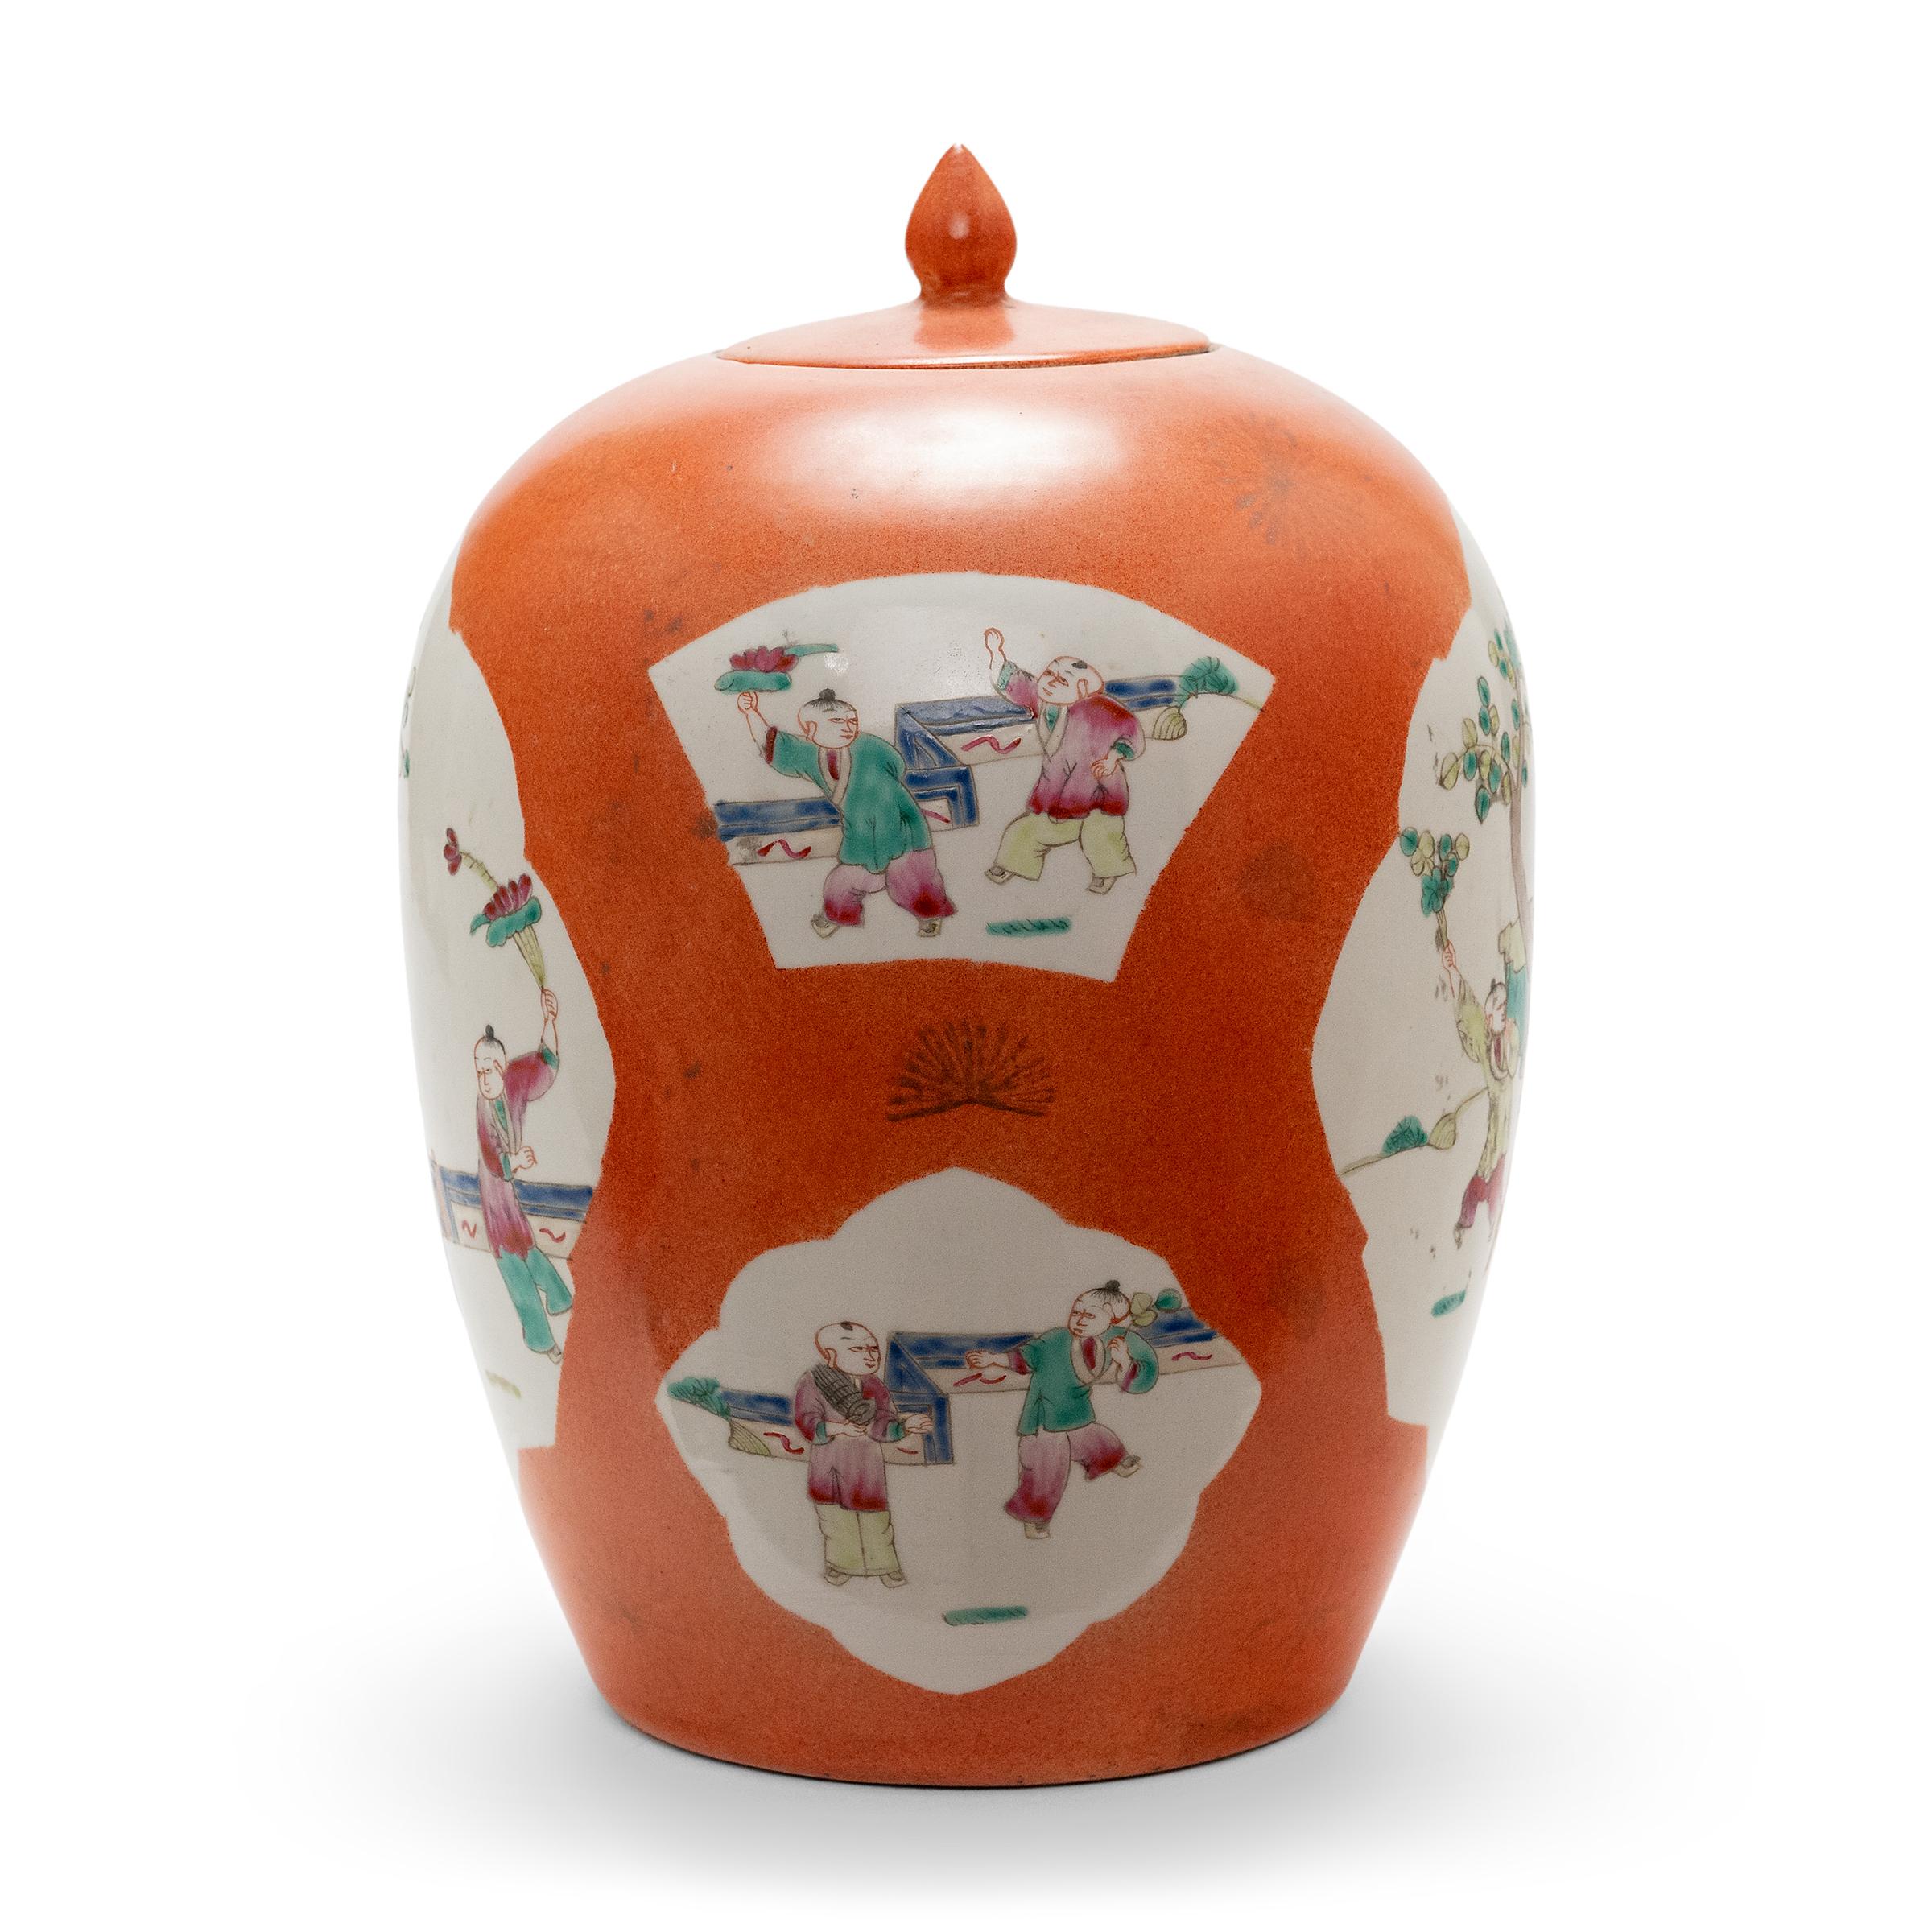 This vase is the perfect example of enduring Chinese symbolism and design. Each side of the ginger jar bears a cartouche painting containing a picturesque scene. Attendants watch over young boys in a traditional garden, while some practice martial